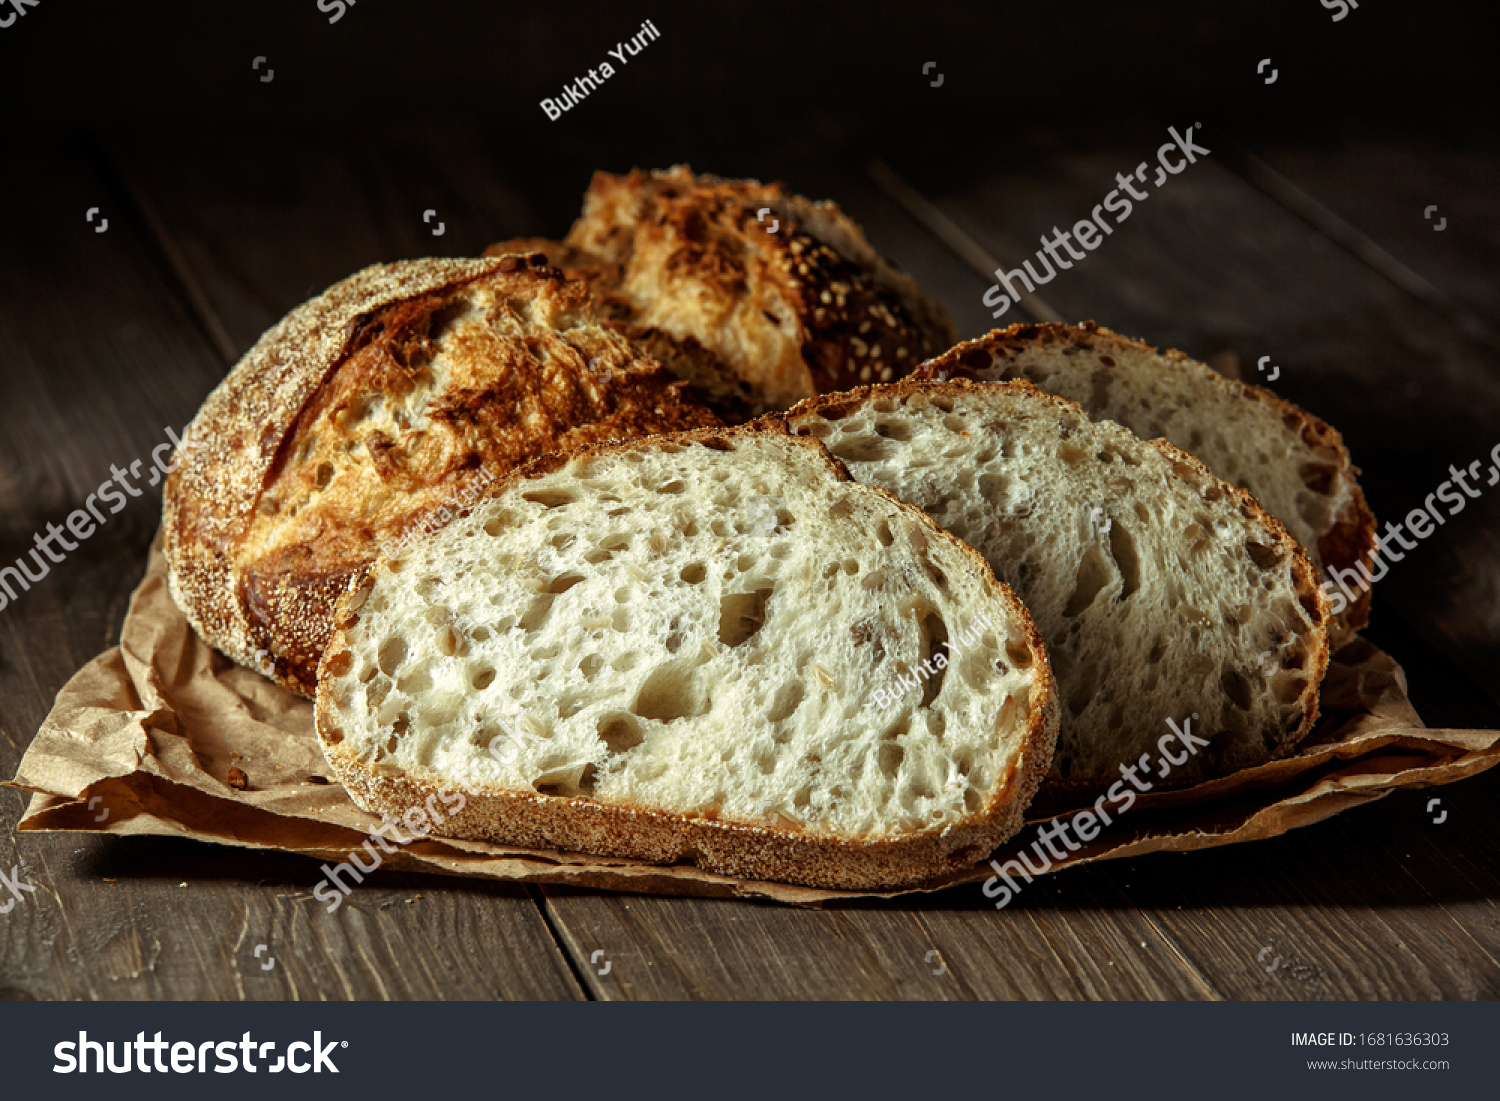 Bread, traditional sourdough bread cut into slices on a rustic wooden background. Concept of traditional leavened bread baking methods. Healthy food. #1681636303